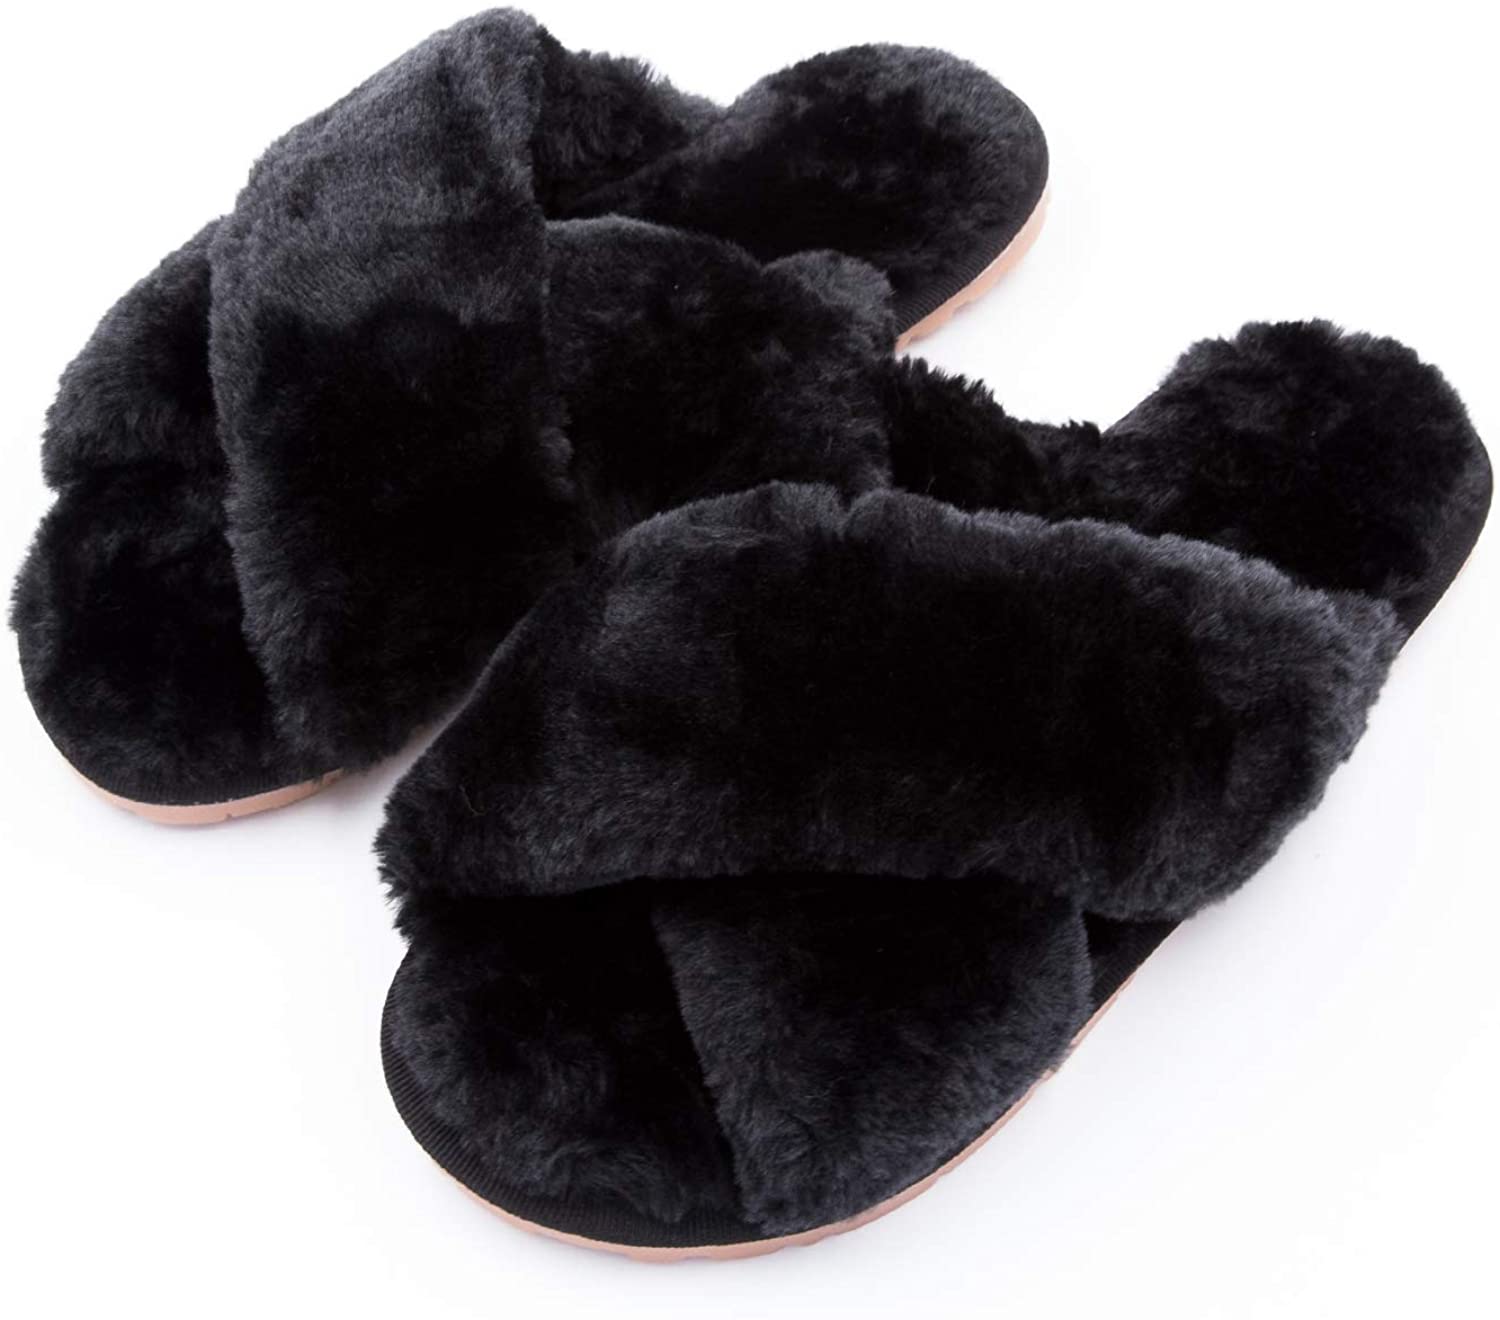  NINE WEST Premium Women's Slippers Fluffy Memory Foam House  Slippers for Women Cozy Furry Insole in Black Plaid Small Size 5-6